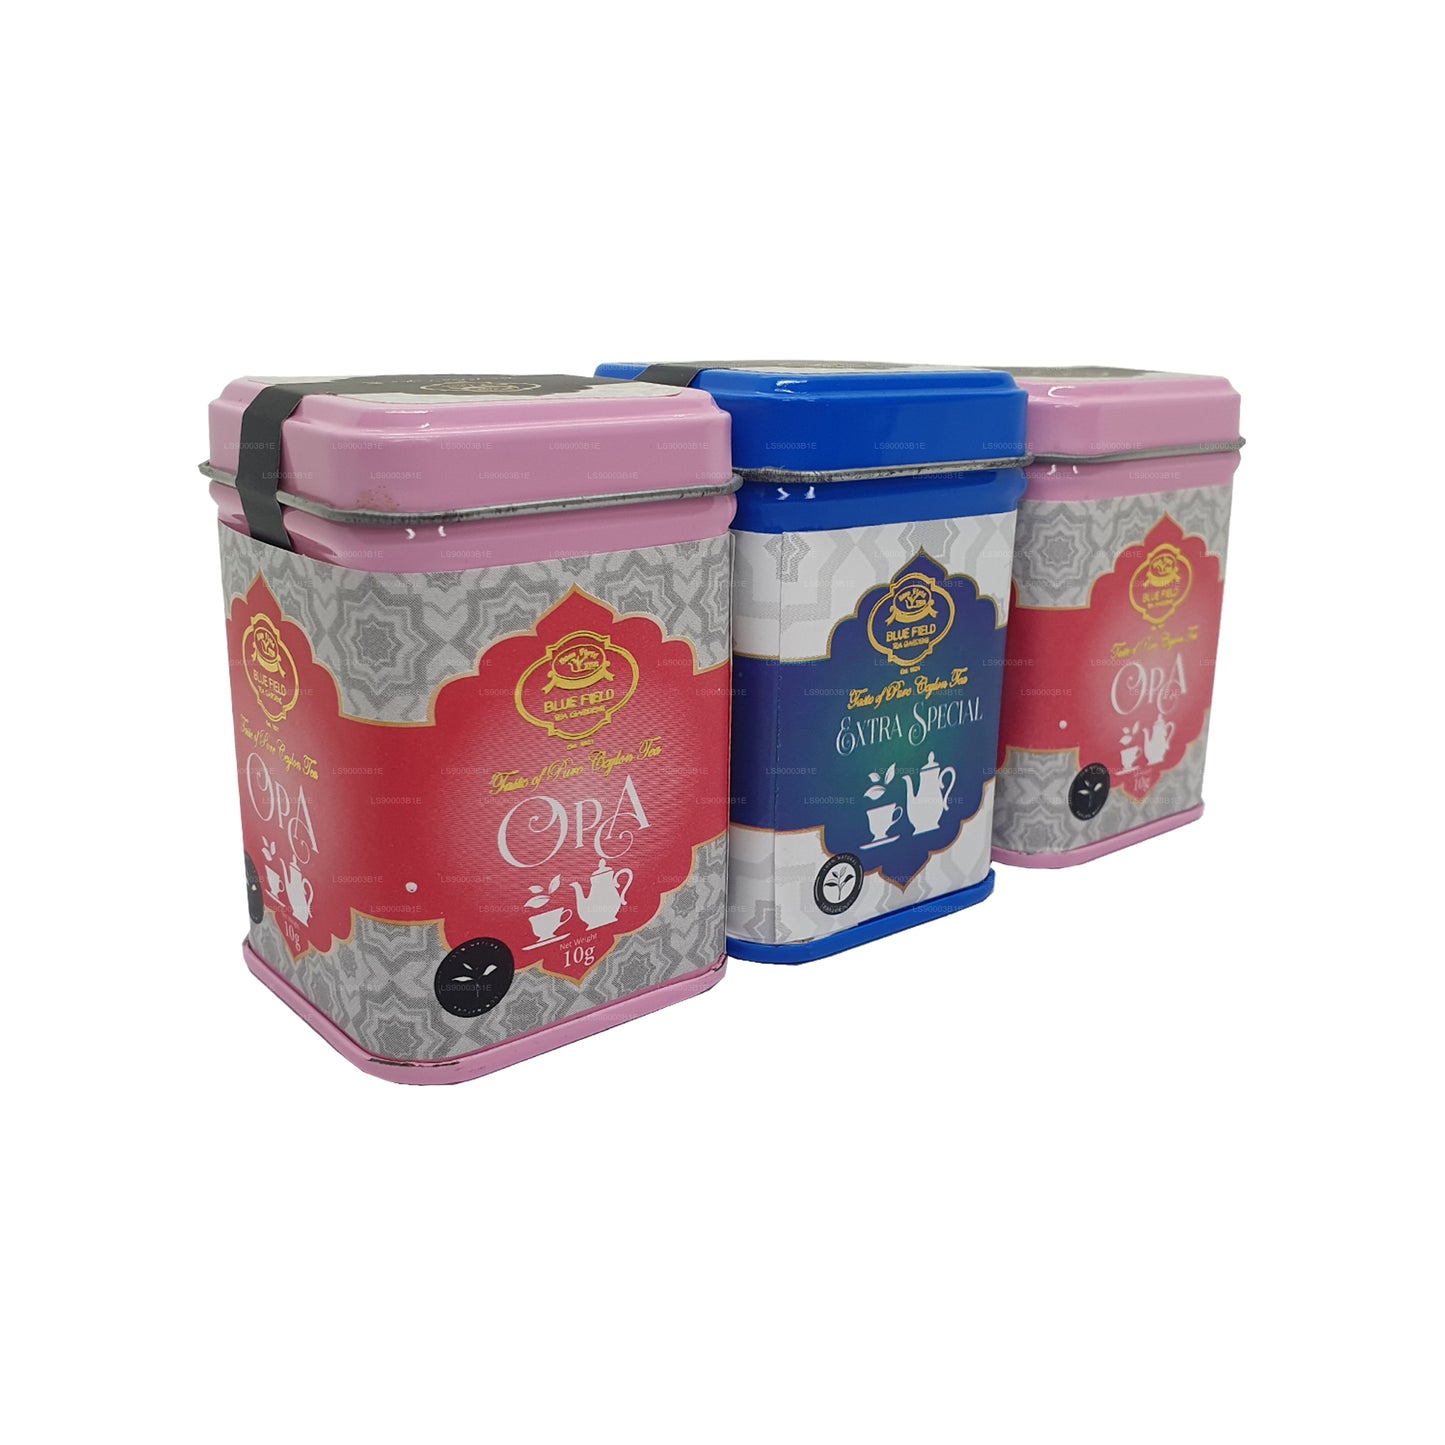 Bluefield Tea Extra Special With OPA (3 Tin Collection)